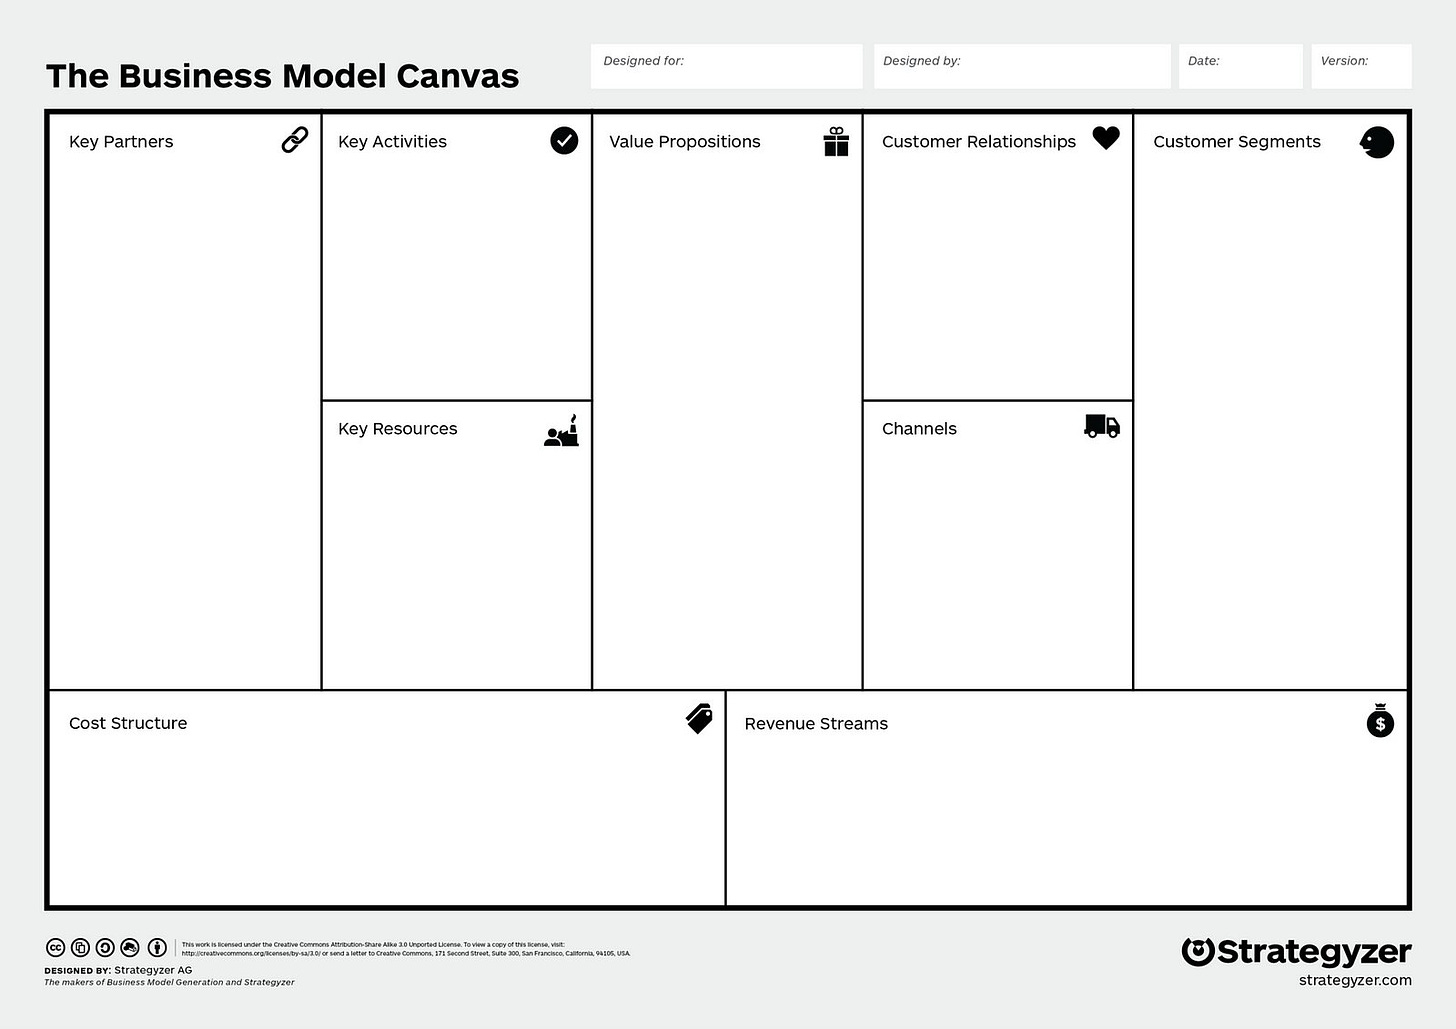 Source: Alexander Osterwalder and Yves Pigneur in ‘Business Model Generation: A Handbook for Visionaries, Game Changers, and Challengers’ https://strategyzer.com/canvas/business-model-canvas